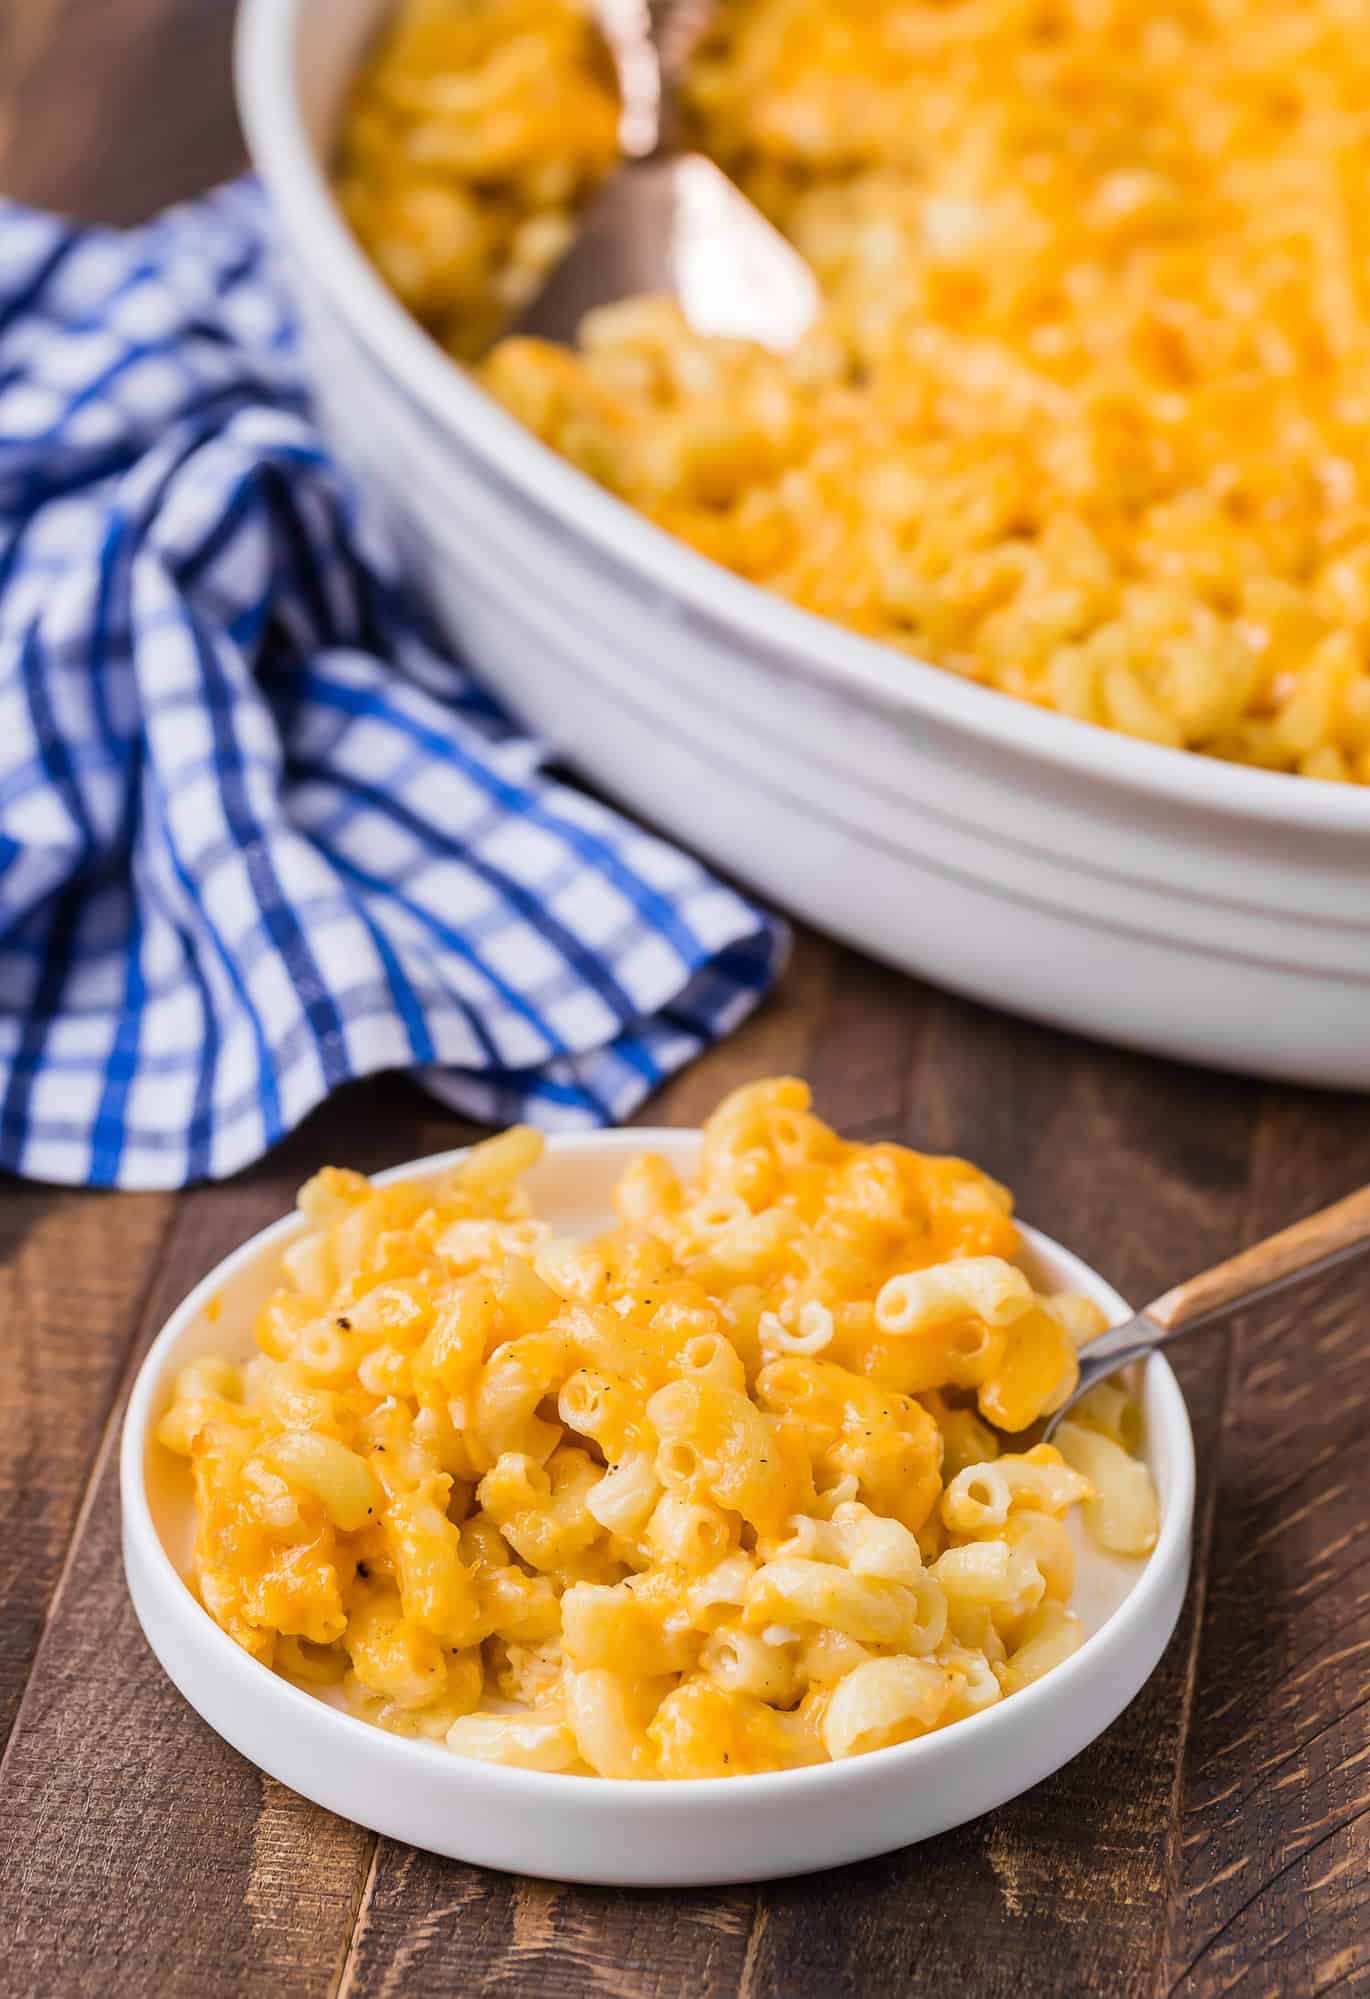 Plated macaroni and cheese.